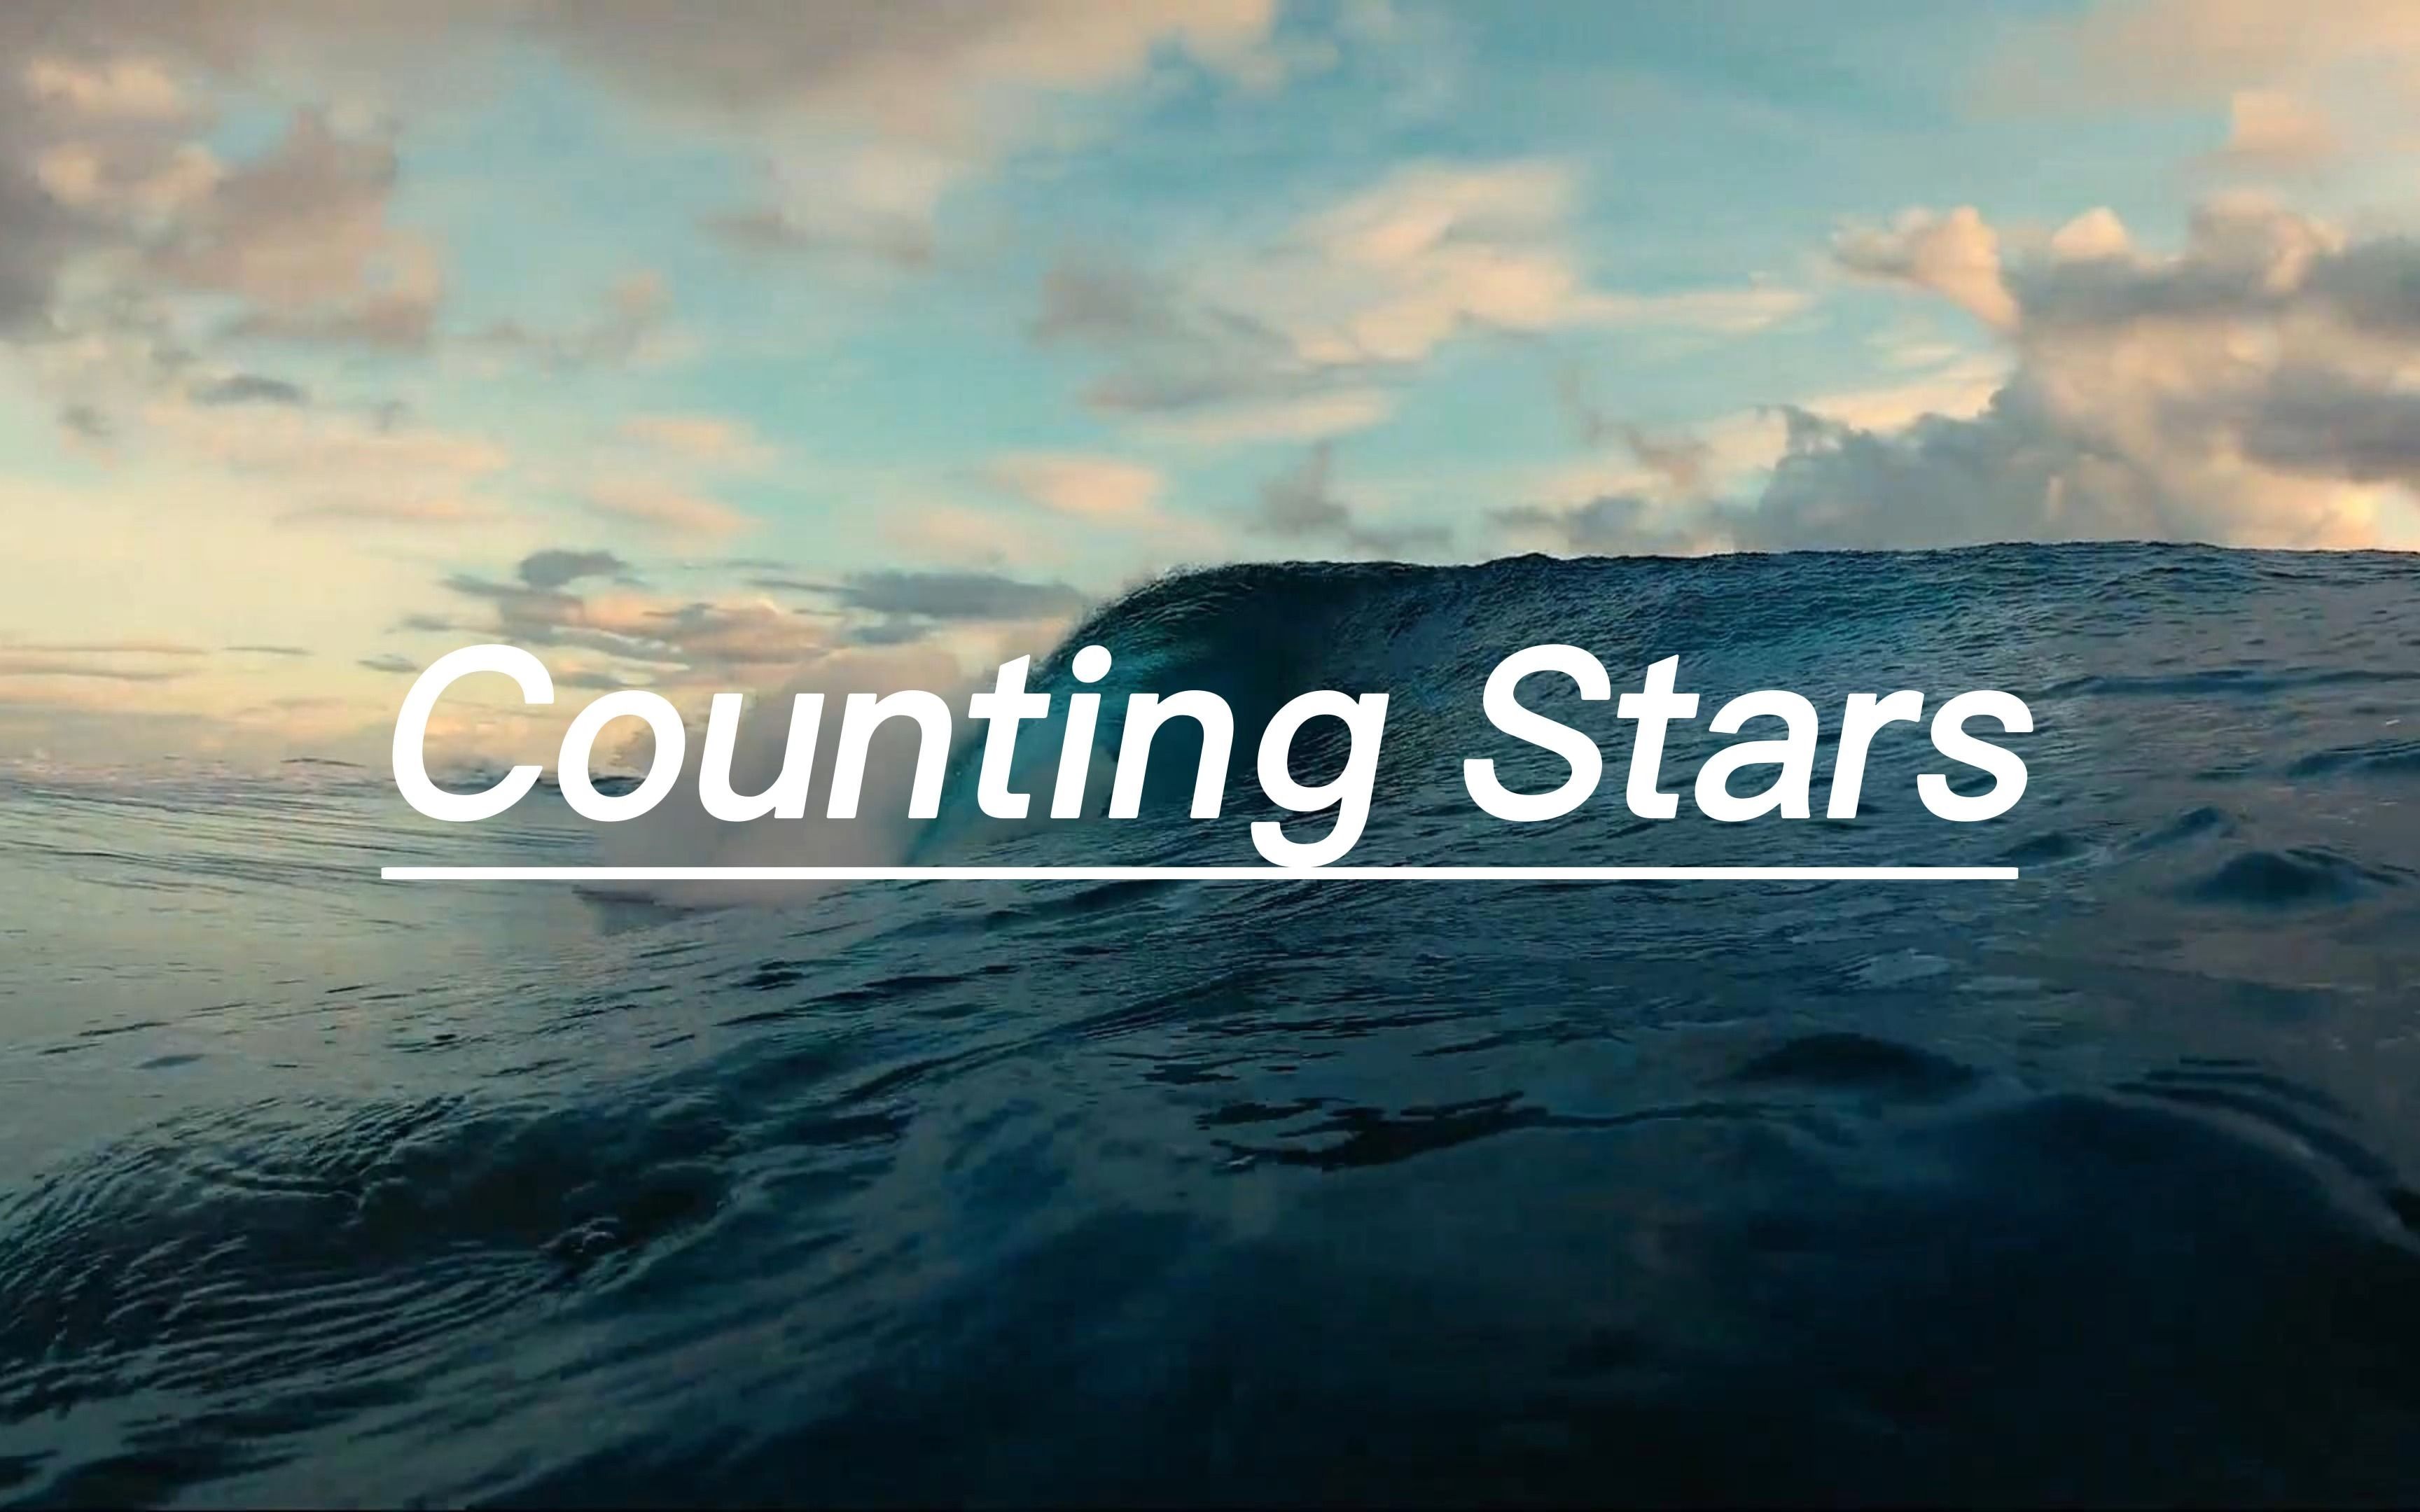 《Counting Stars》，“历尽千帆，寻回本心”